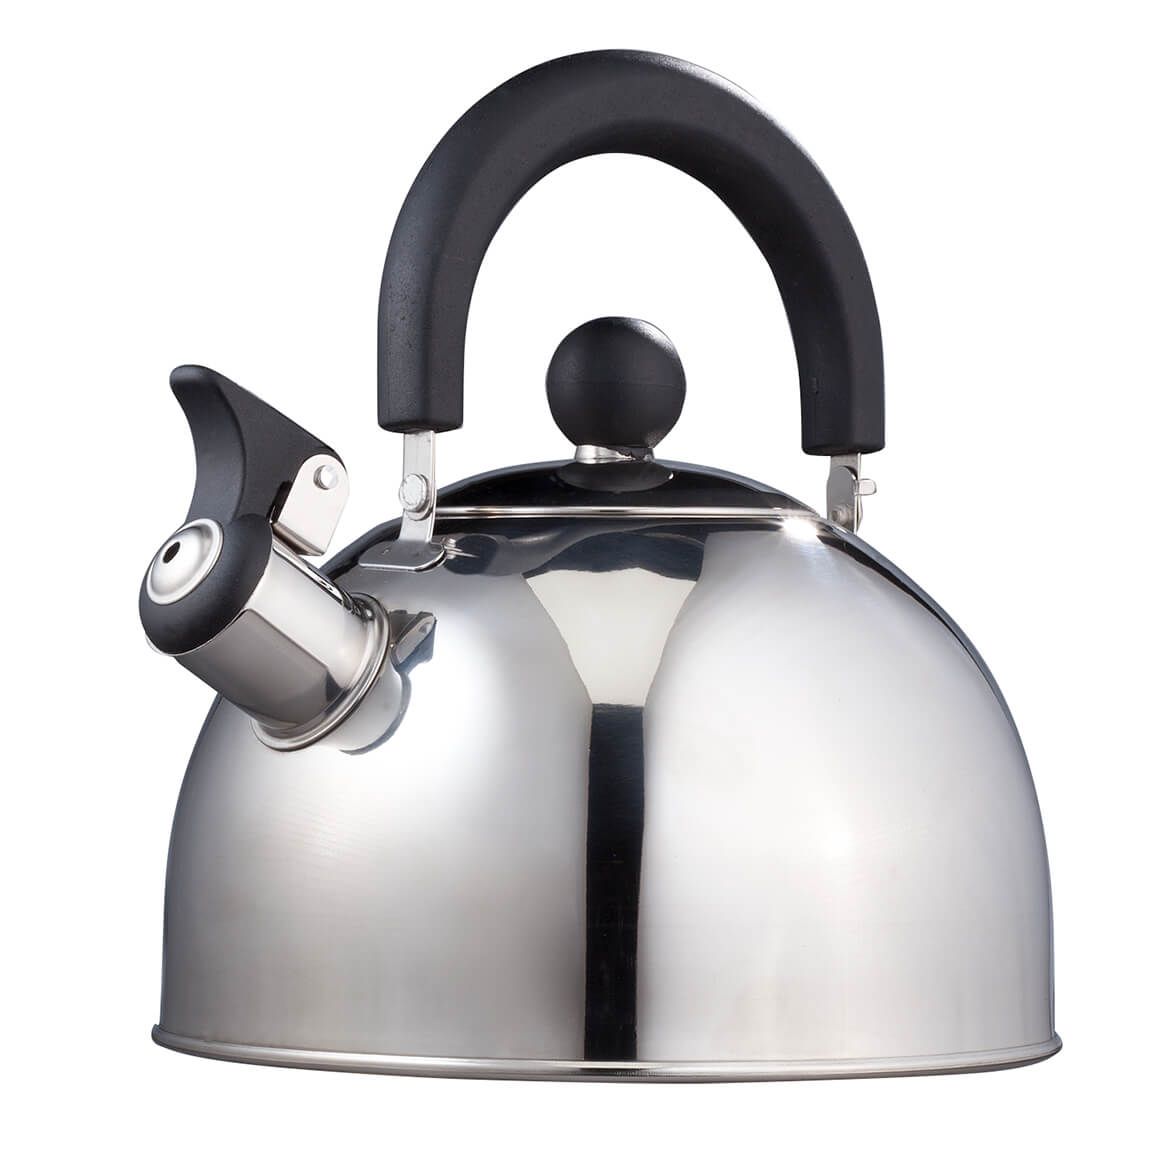 Stainless Steel Whistling Tea Kettle by Home-Style Kitchen + '-' + 353542